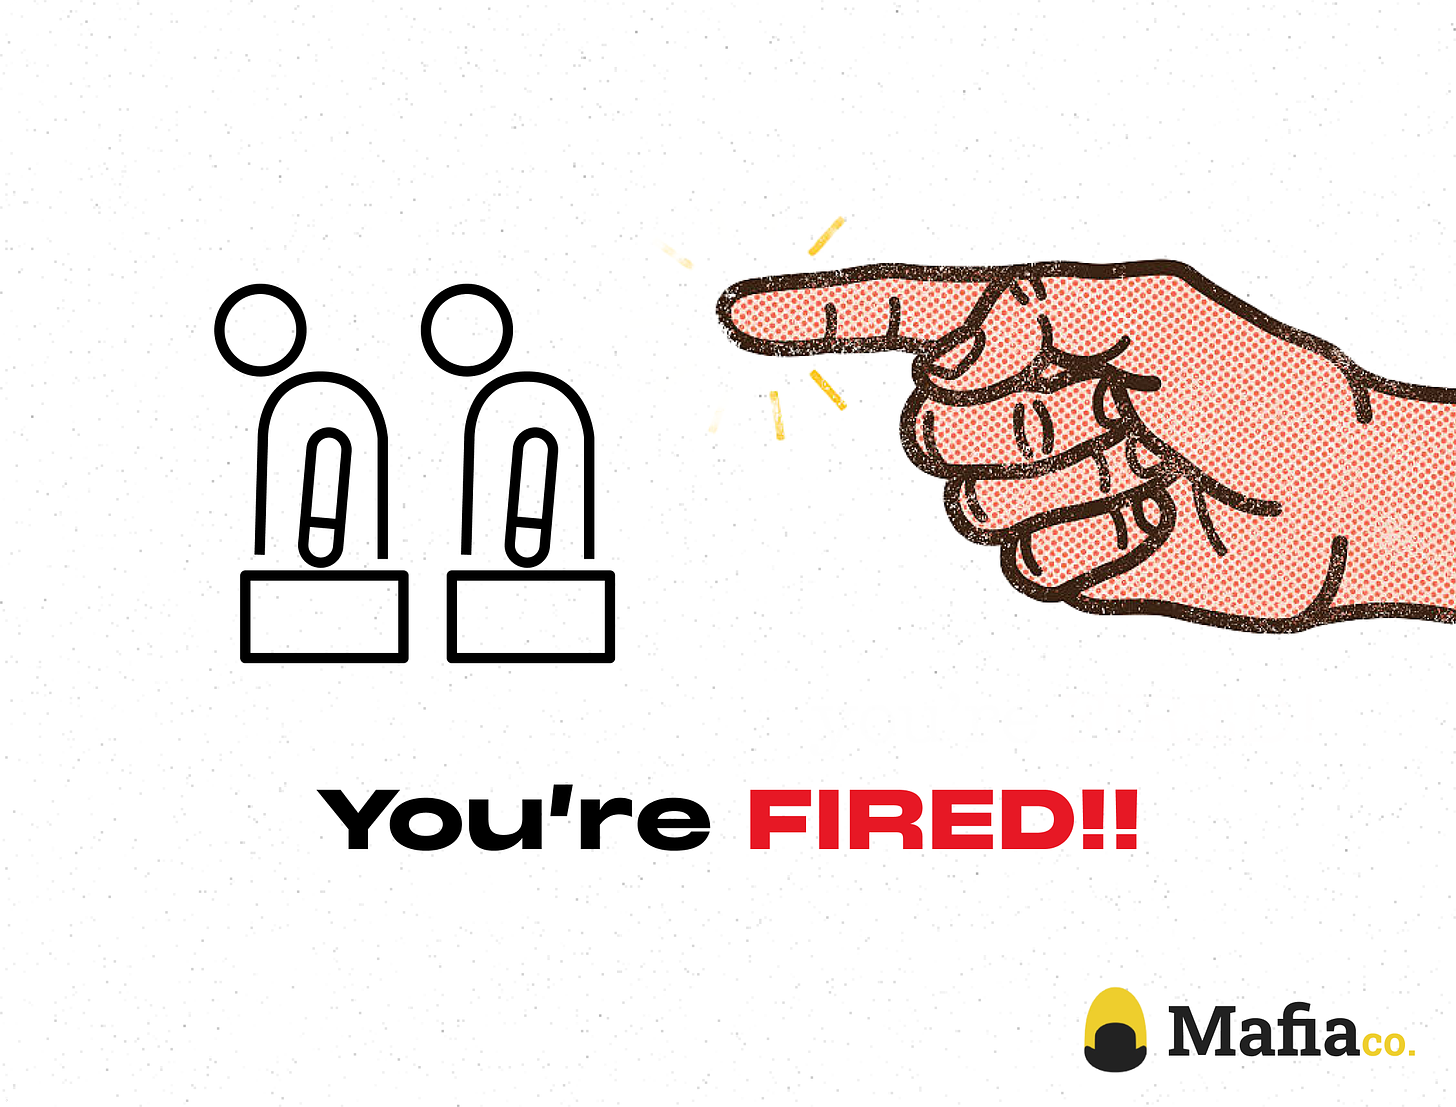 Graphic of a hand sending two figures away with a caption "YOU'RE FIRED!!"